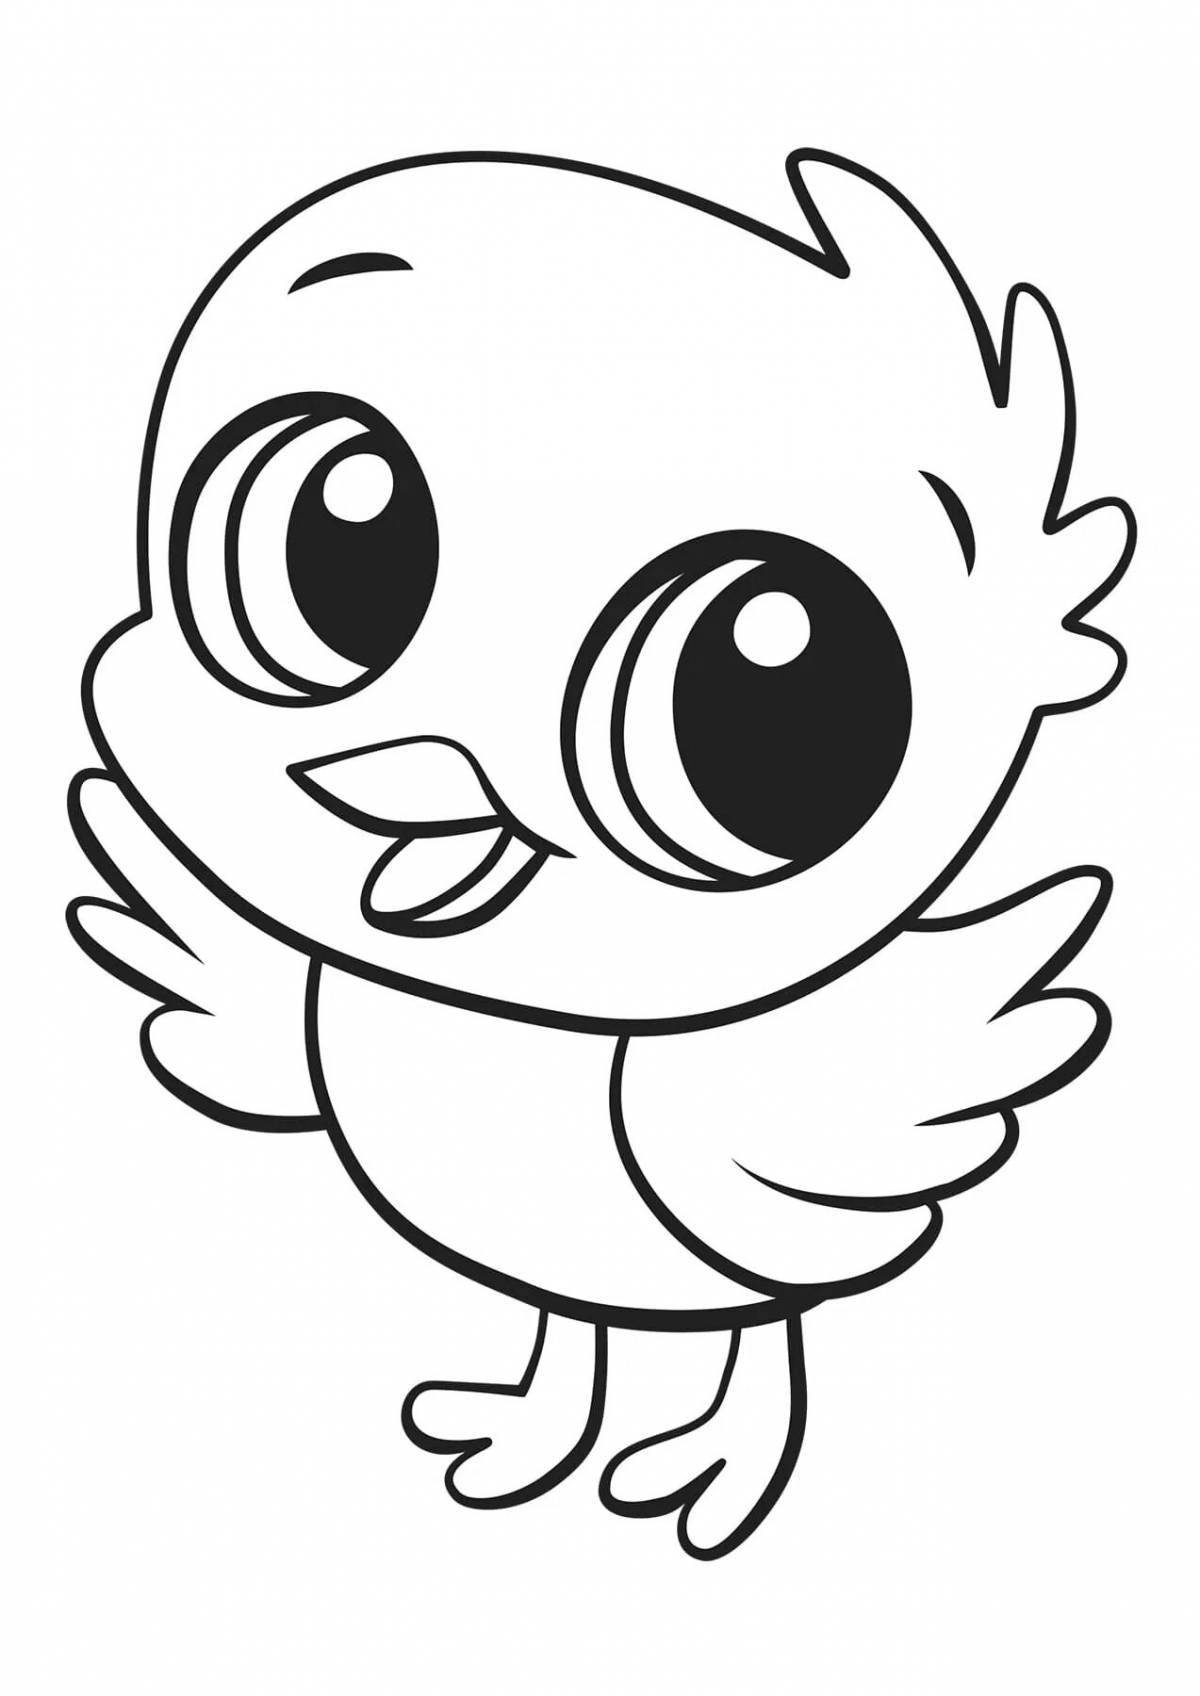 Adorable chicken drawing